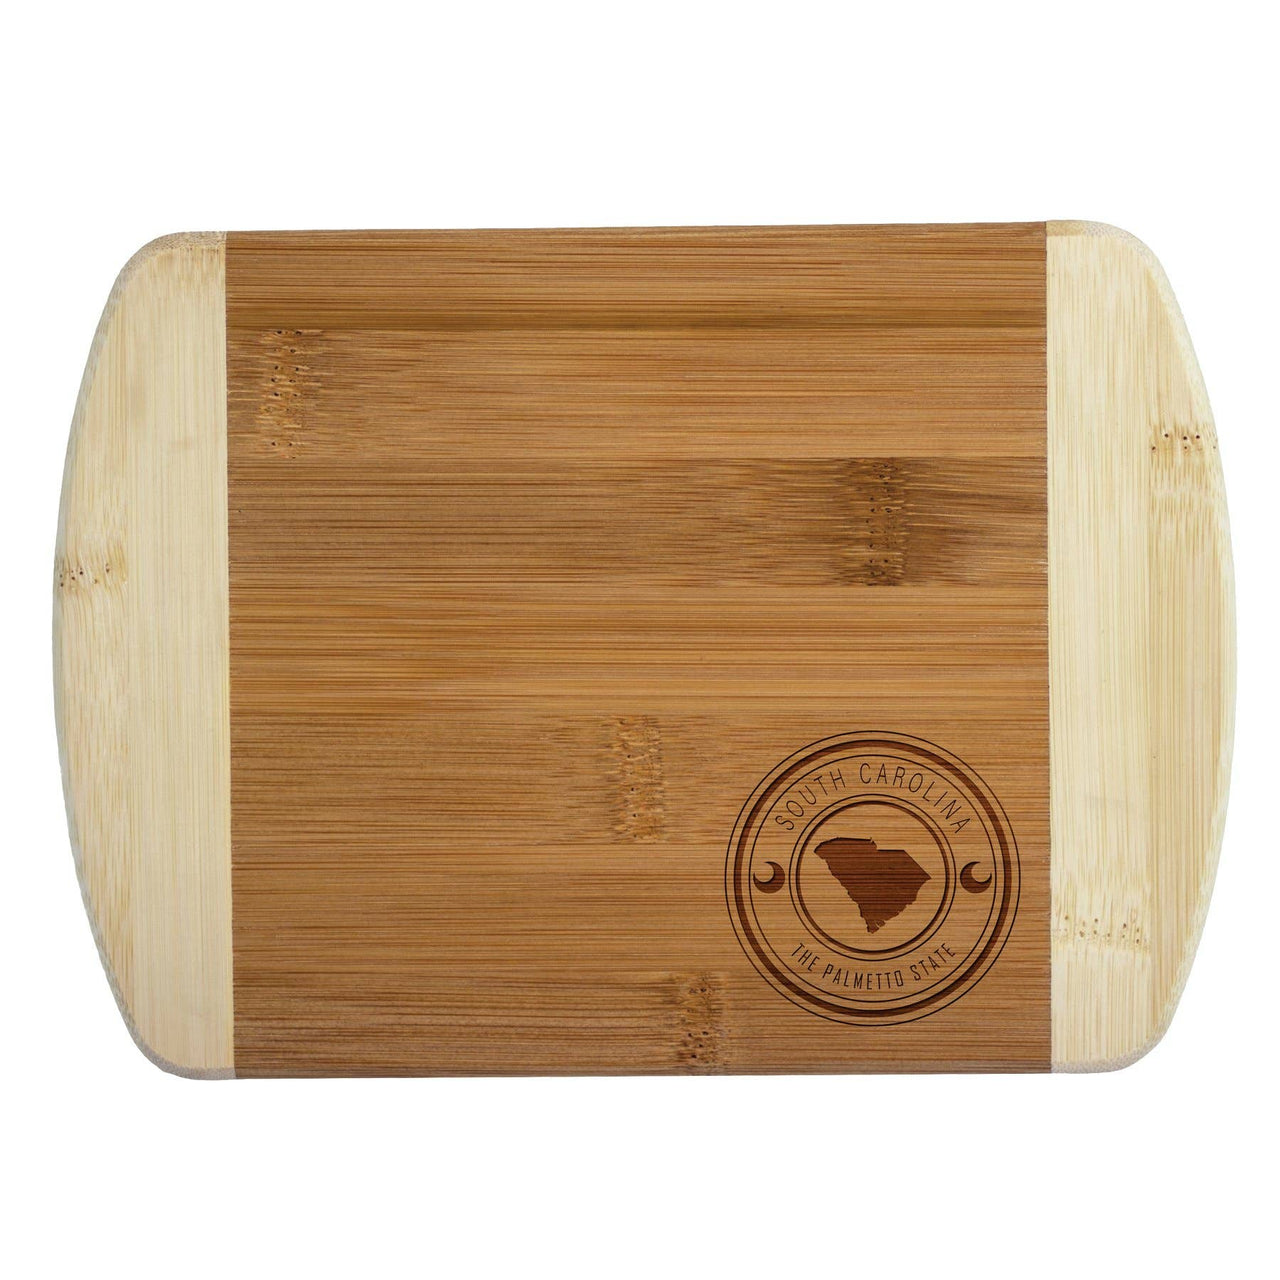 Totally Bamboo Cutting Boards Totally Bamboo - South Carolina State Stamp Series Bar Board